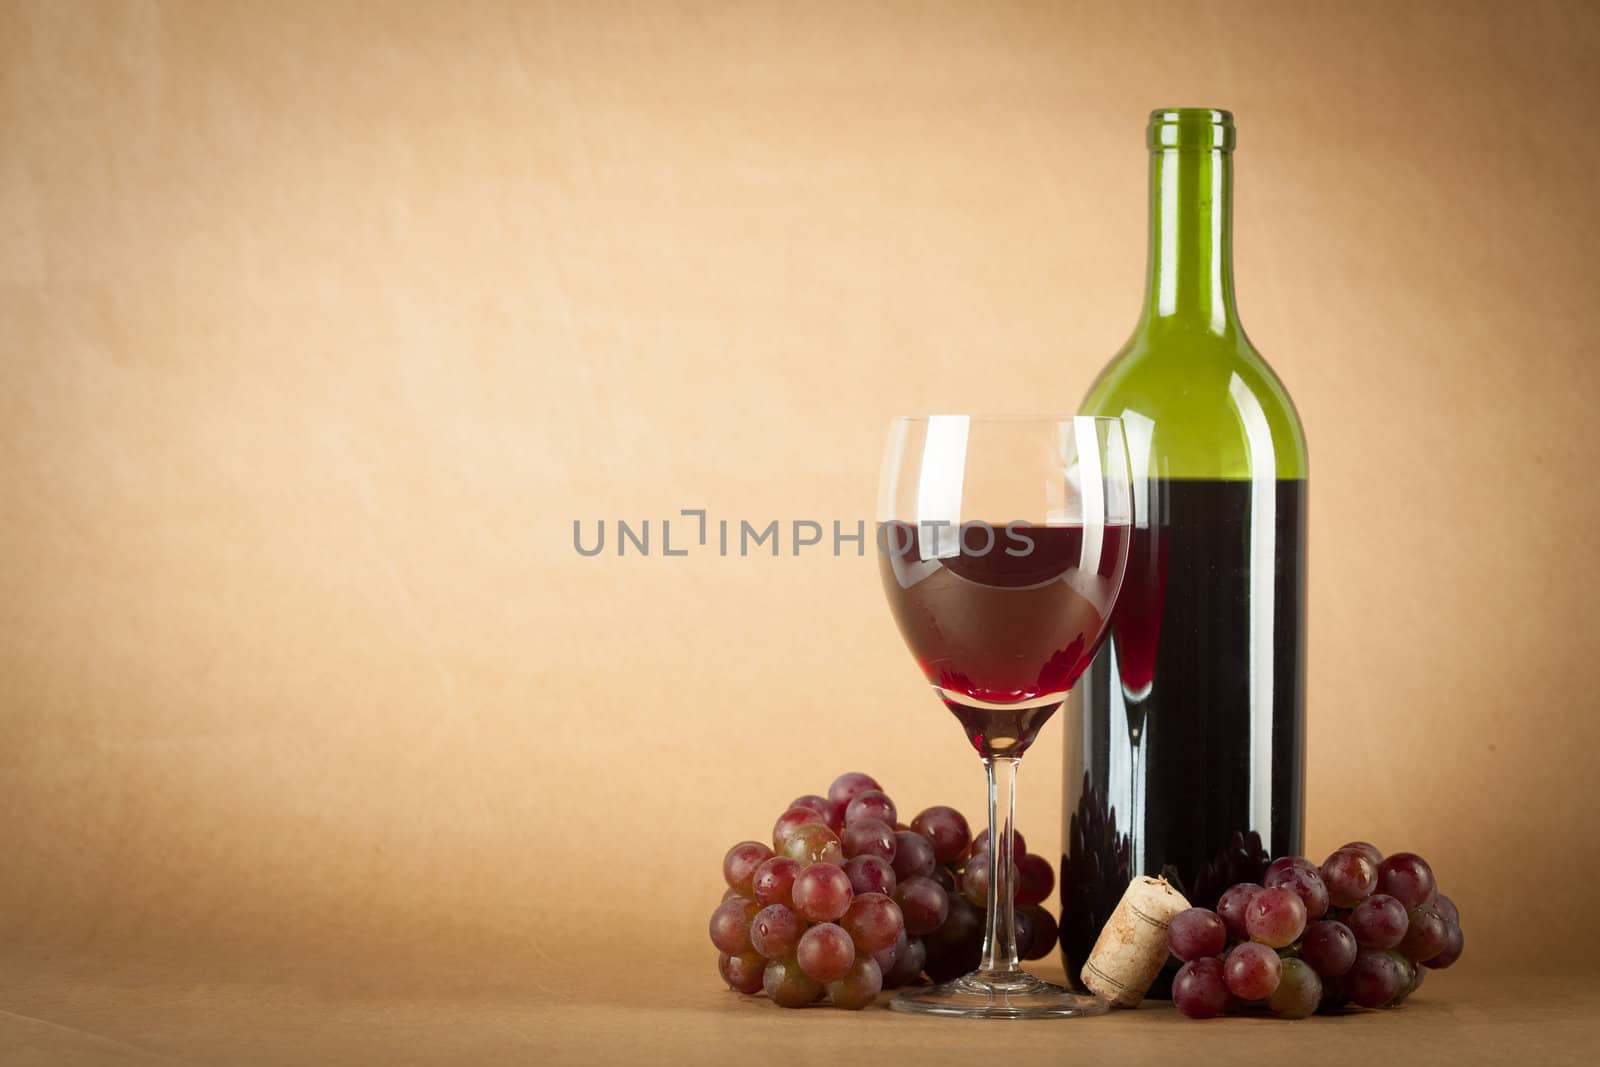 A bottle of red wine, a glass half full and grapes on a vintage orange background.